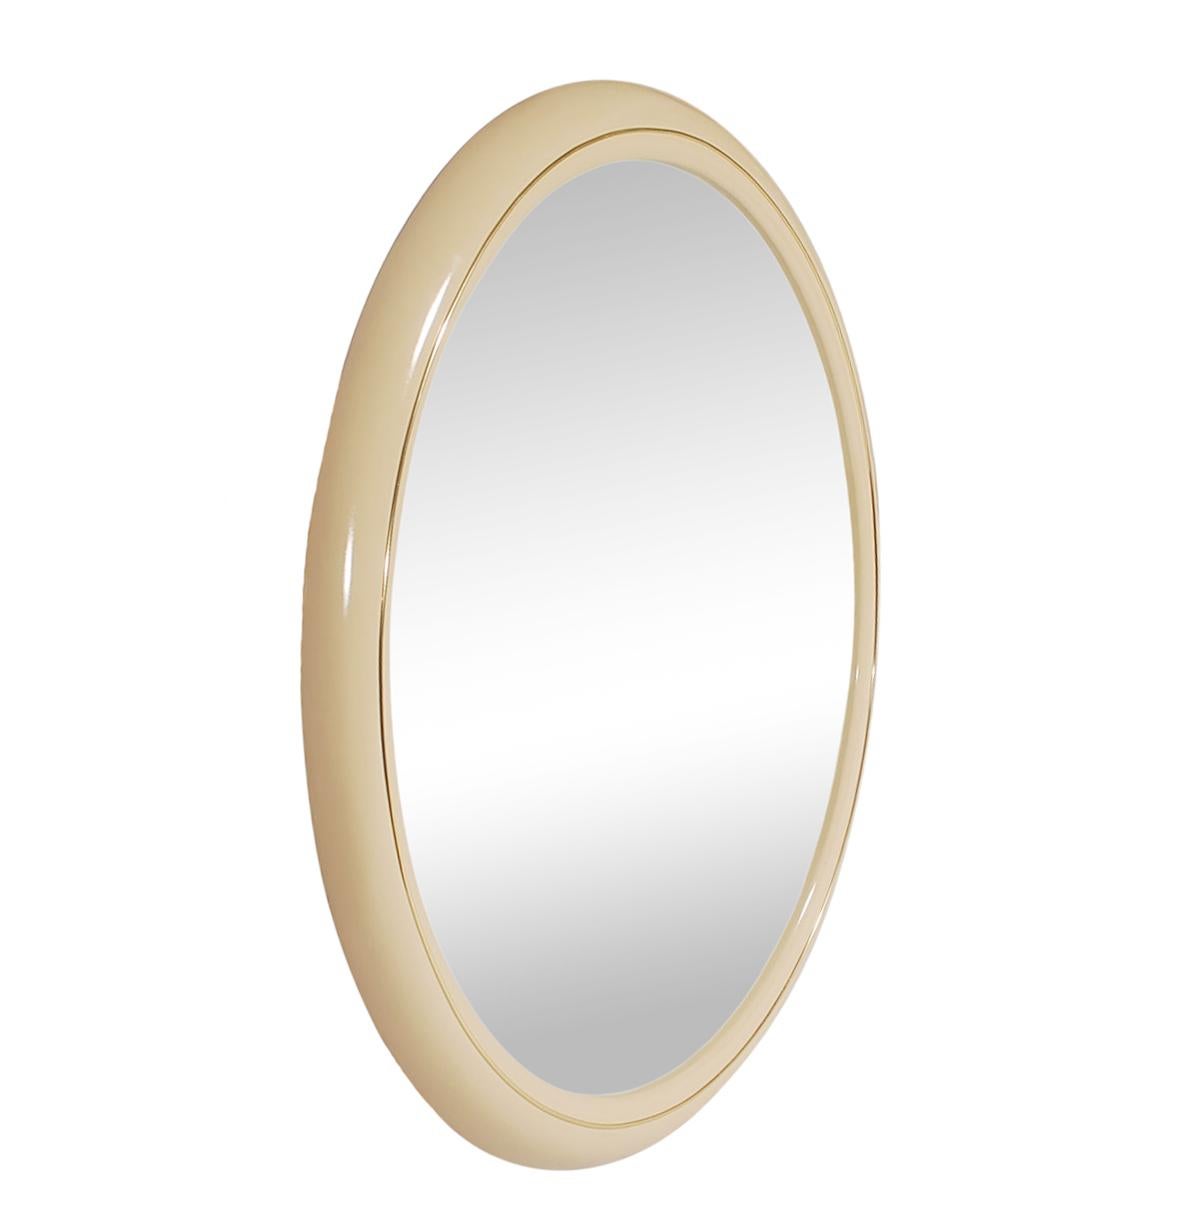 A large circular wall mirror in off-white lacquer from Italy, circa 1970s. It features a solid wood frame with off-white lacquer and brass trim.